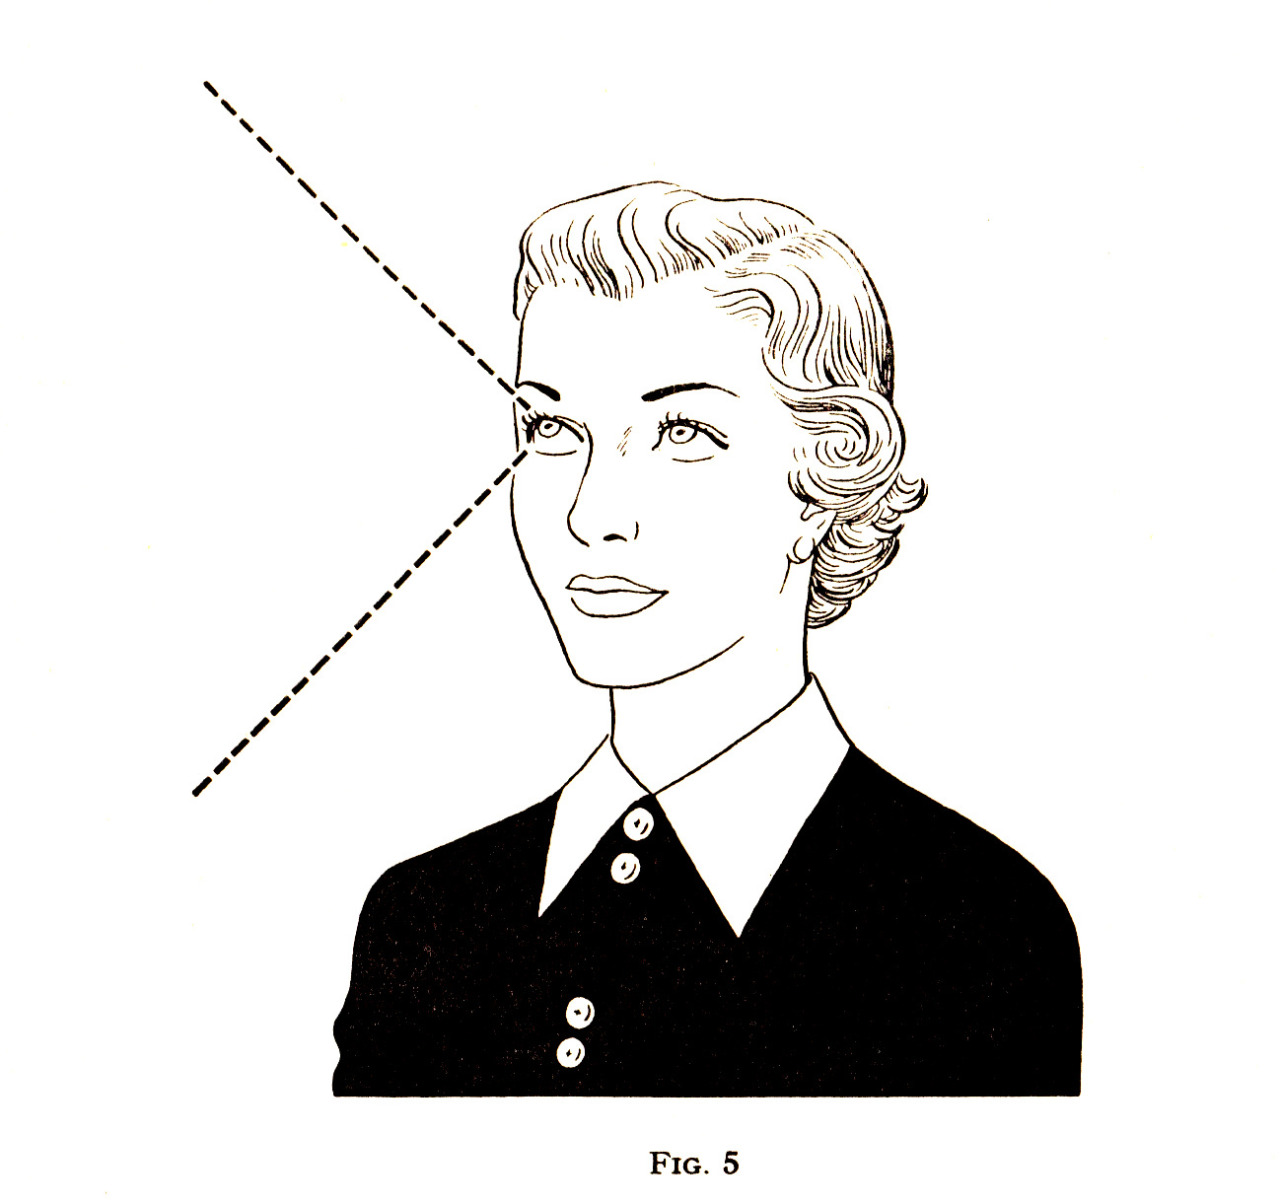 Illustrations from Better Sight Without Glasses, by Harry Benjamin (Health For All